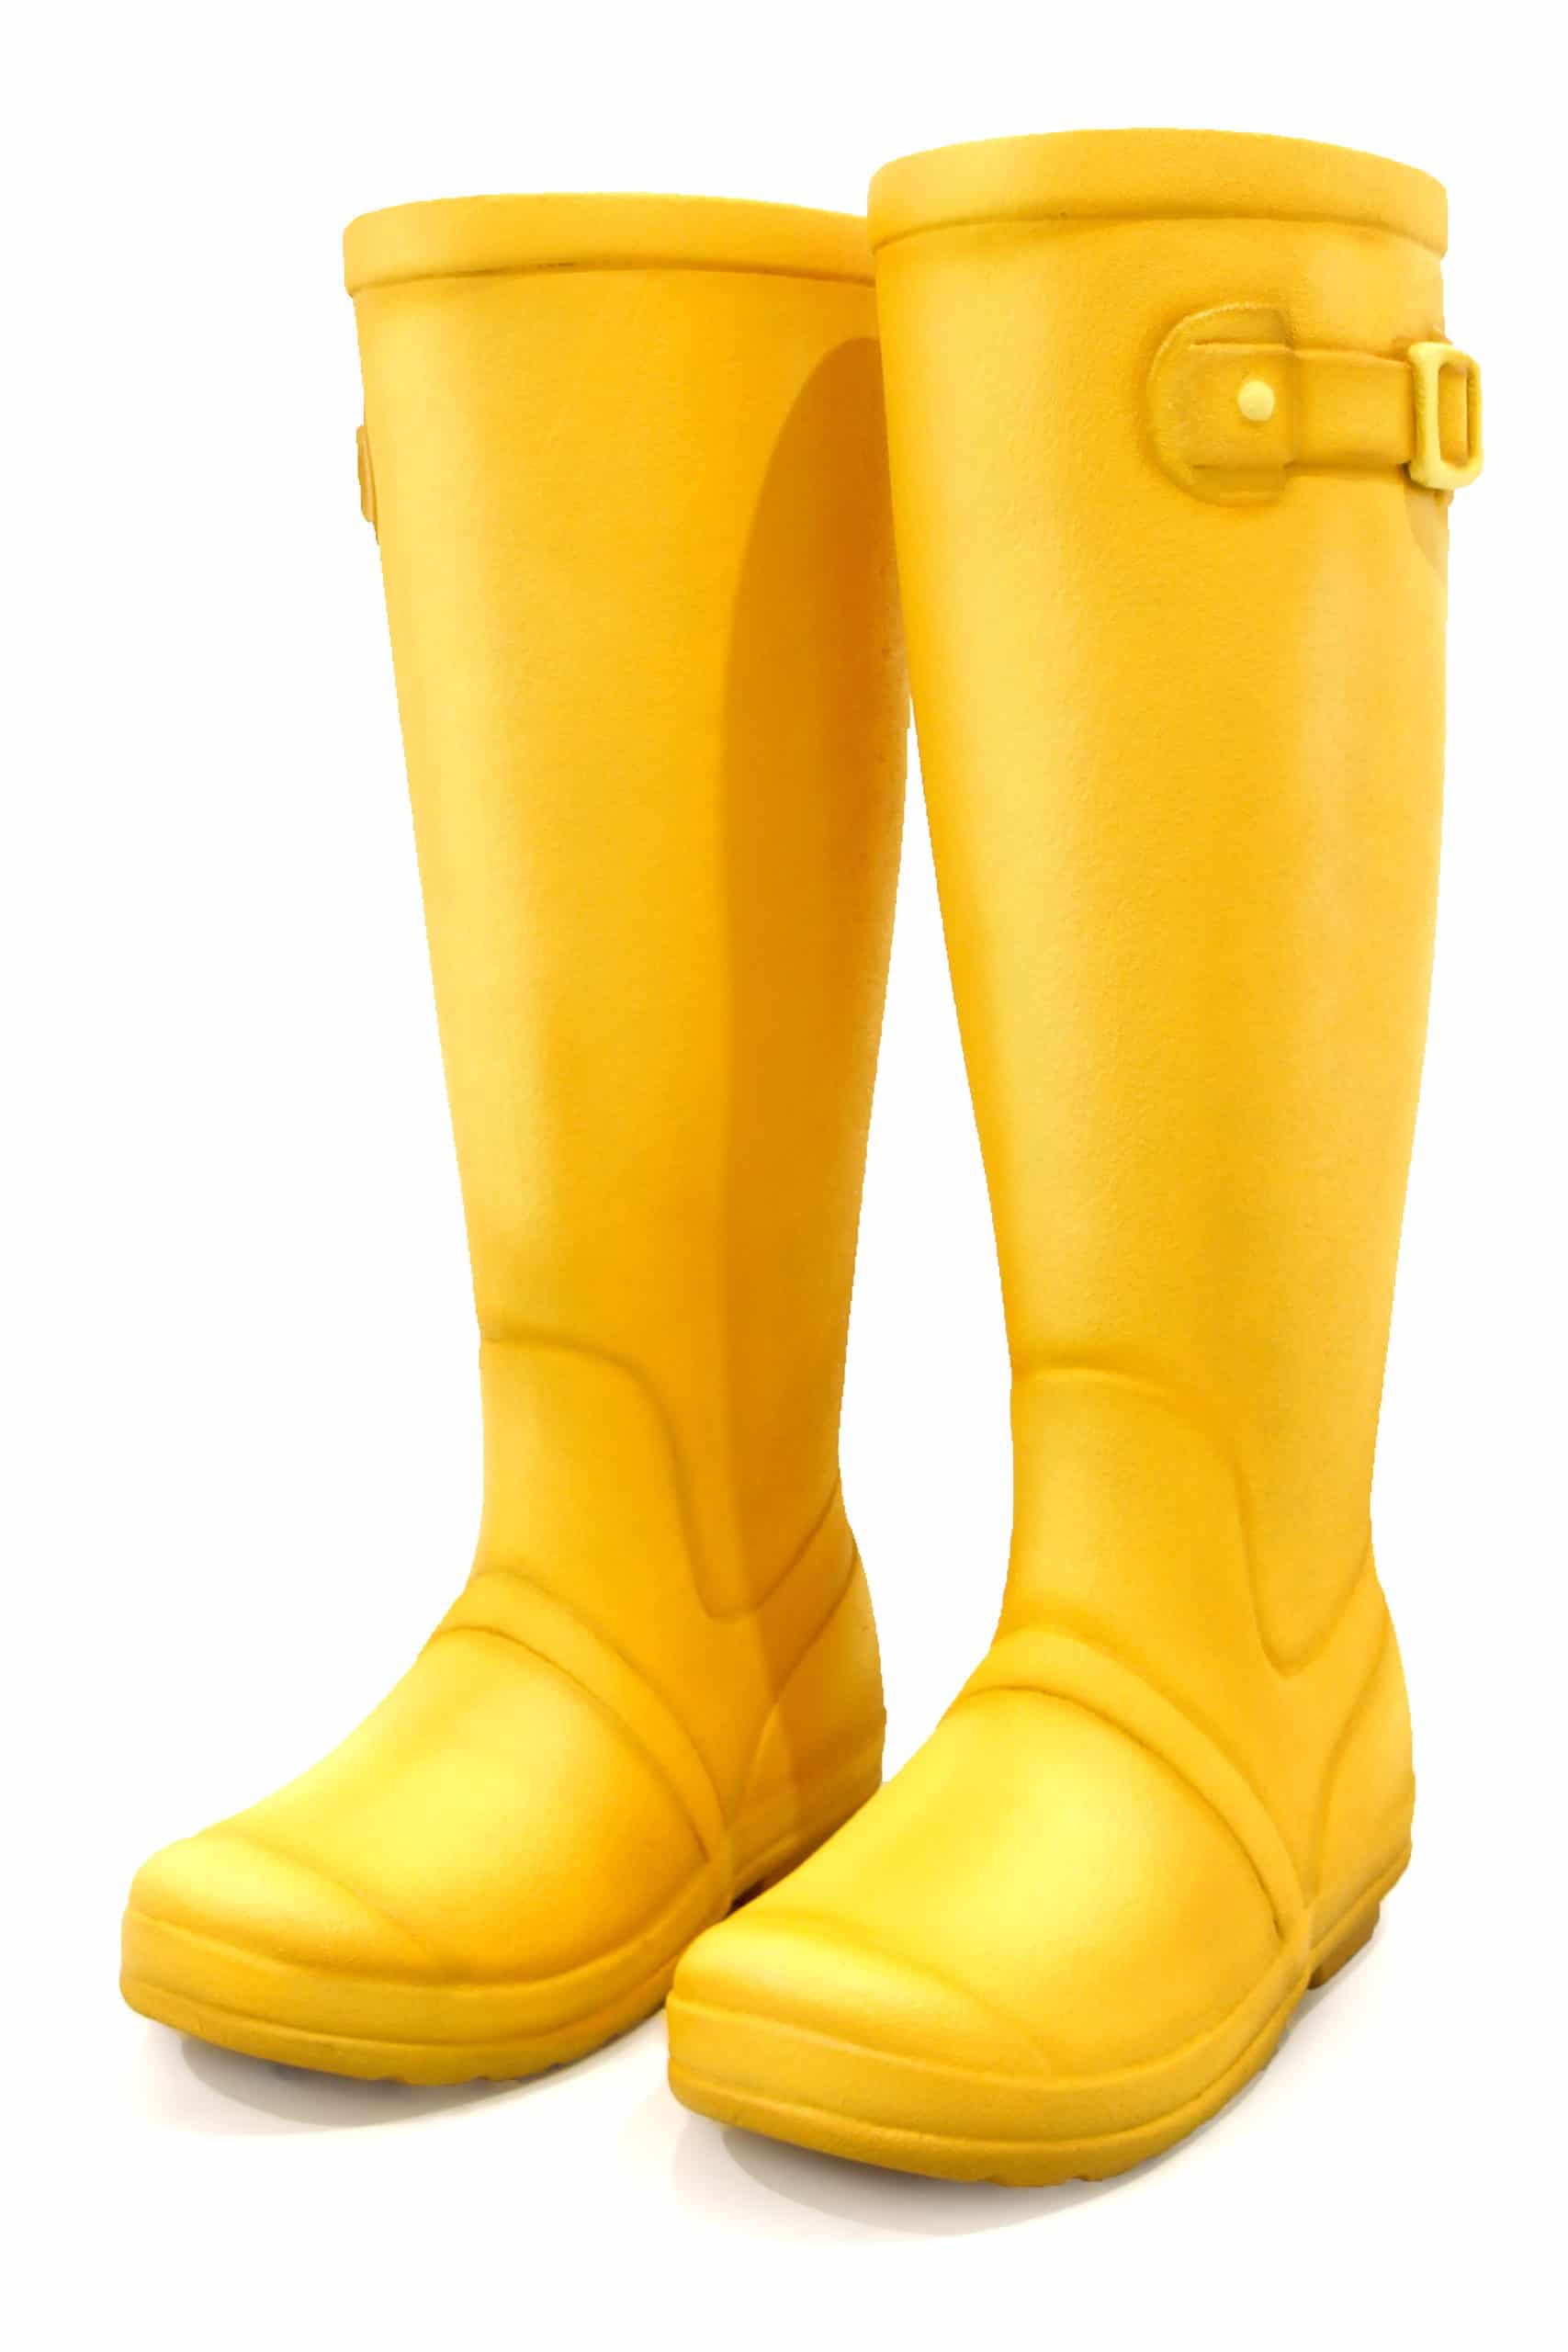 Giant Yellow Welly Boots (Pair)